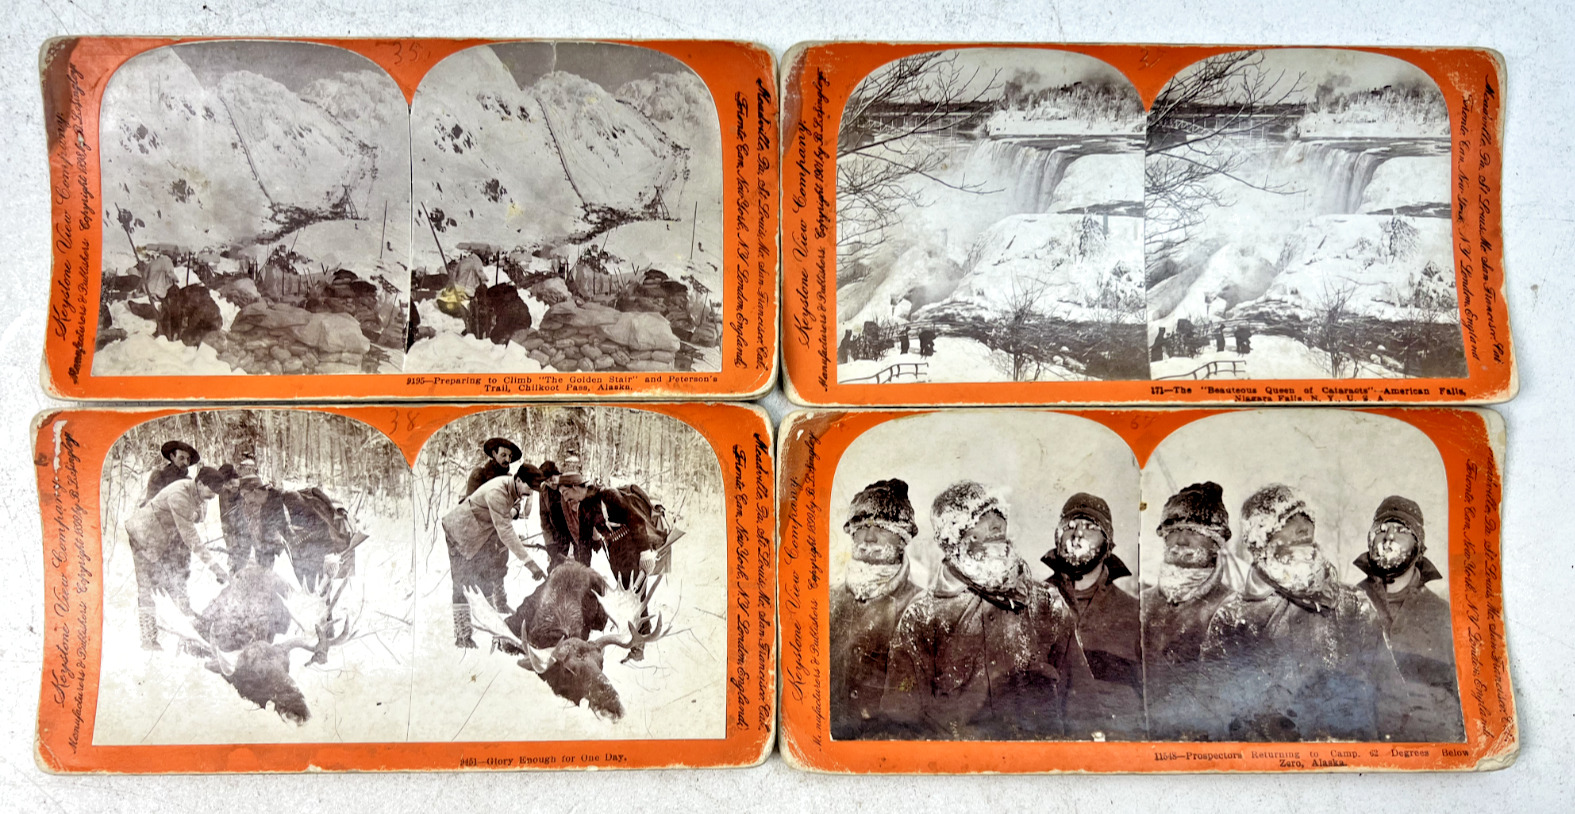 Antique 1898-1901 Keystone View Company Stereoscope Viewer Cards - Lot of 4